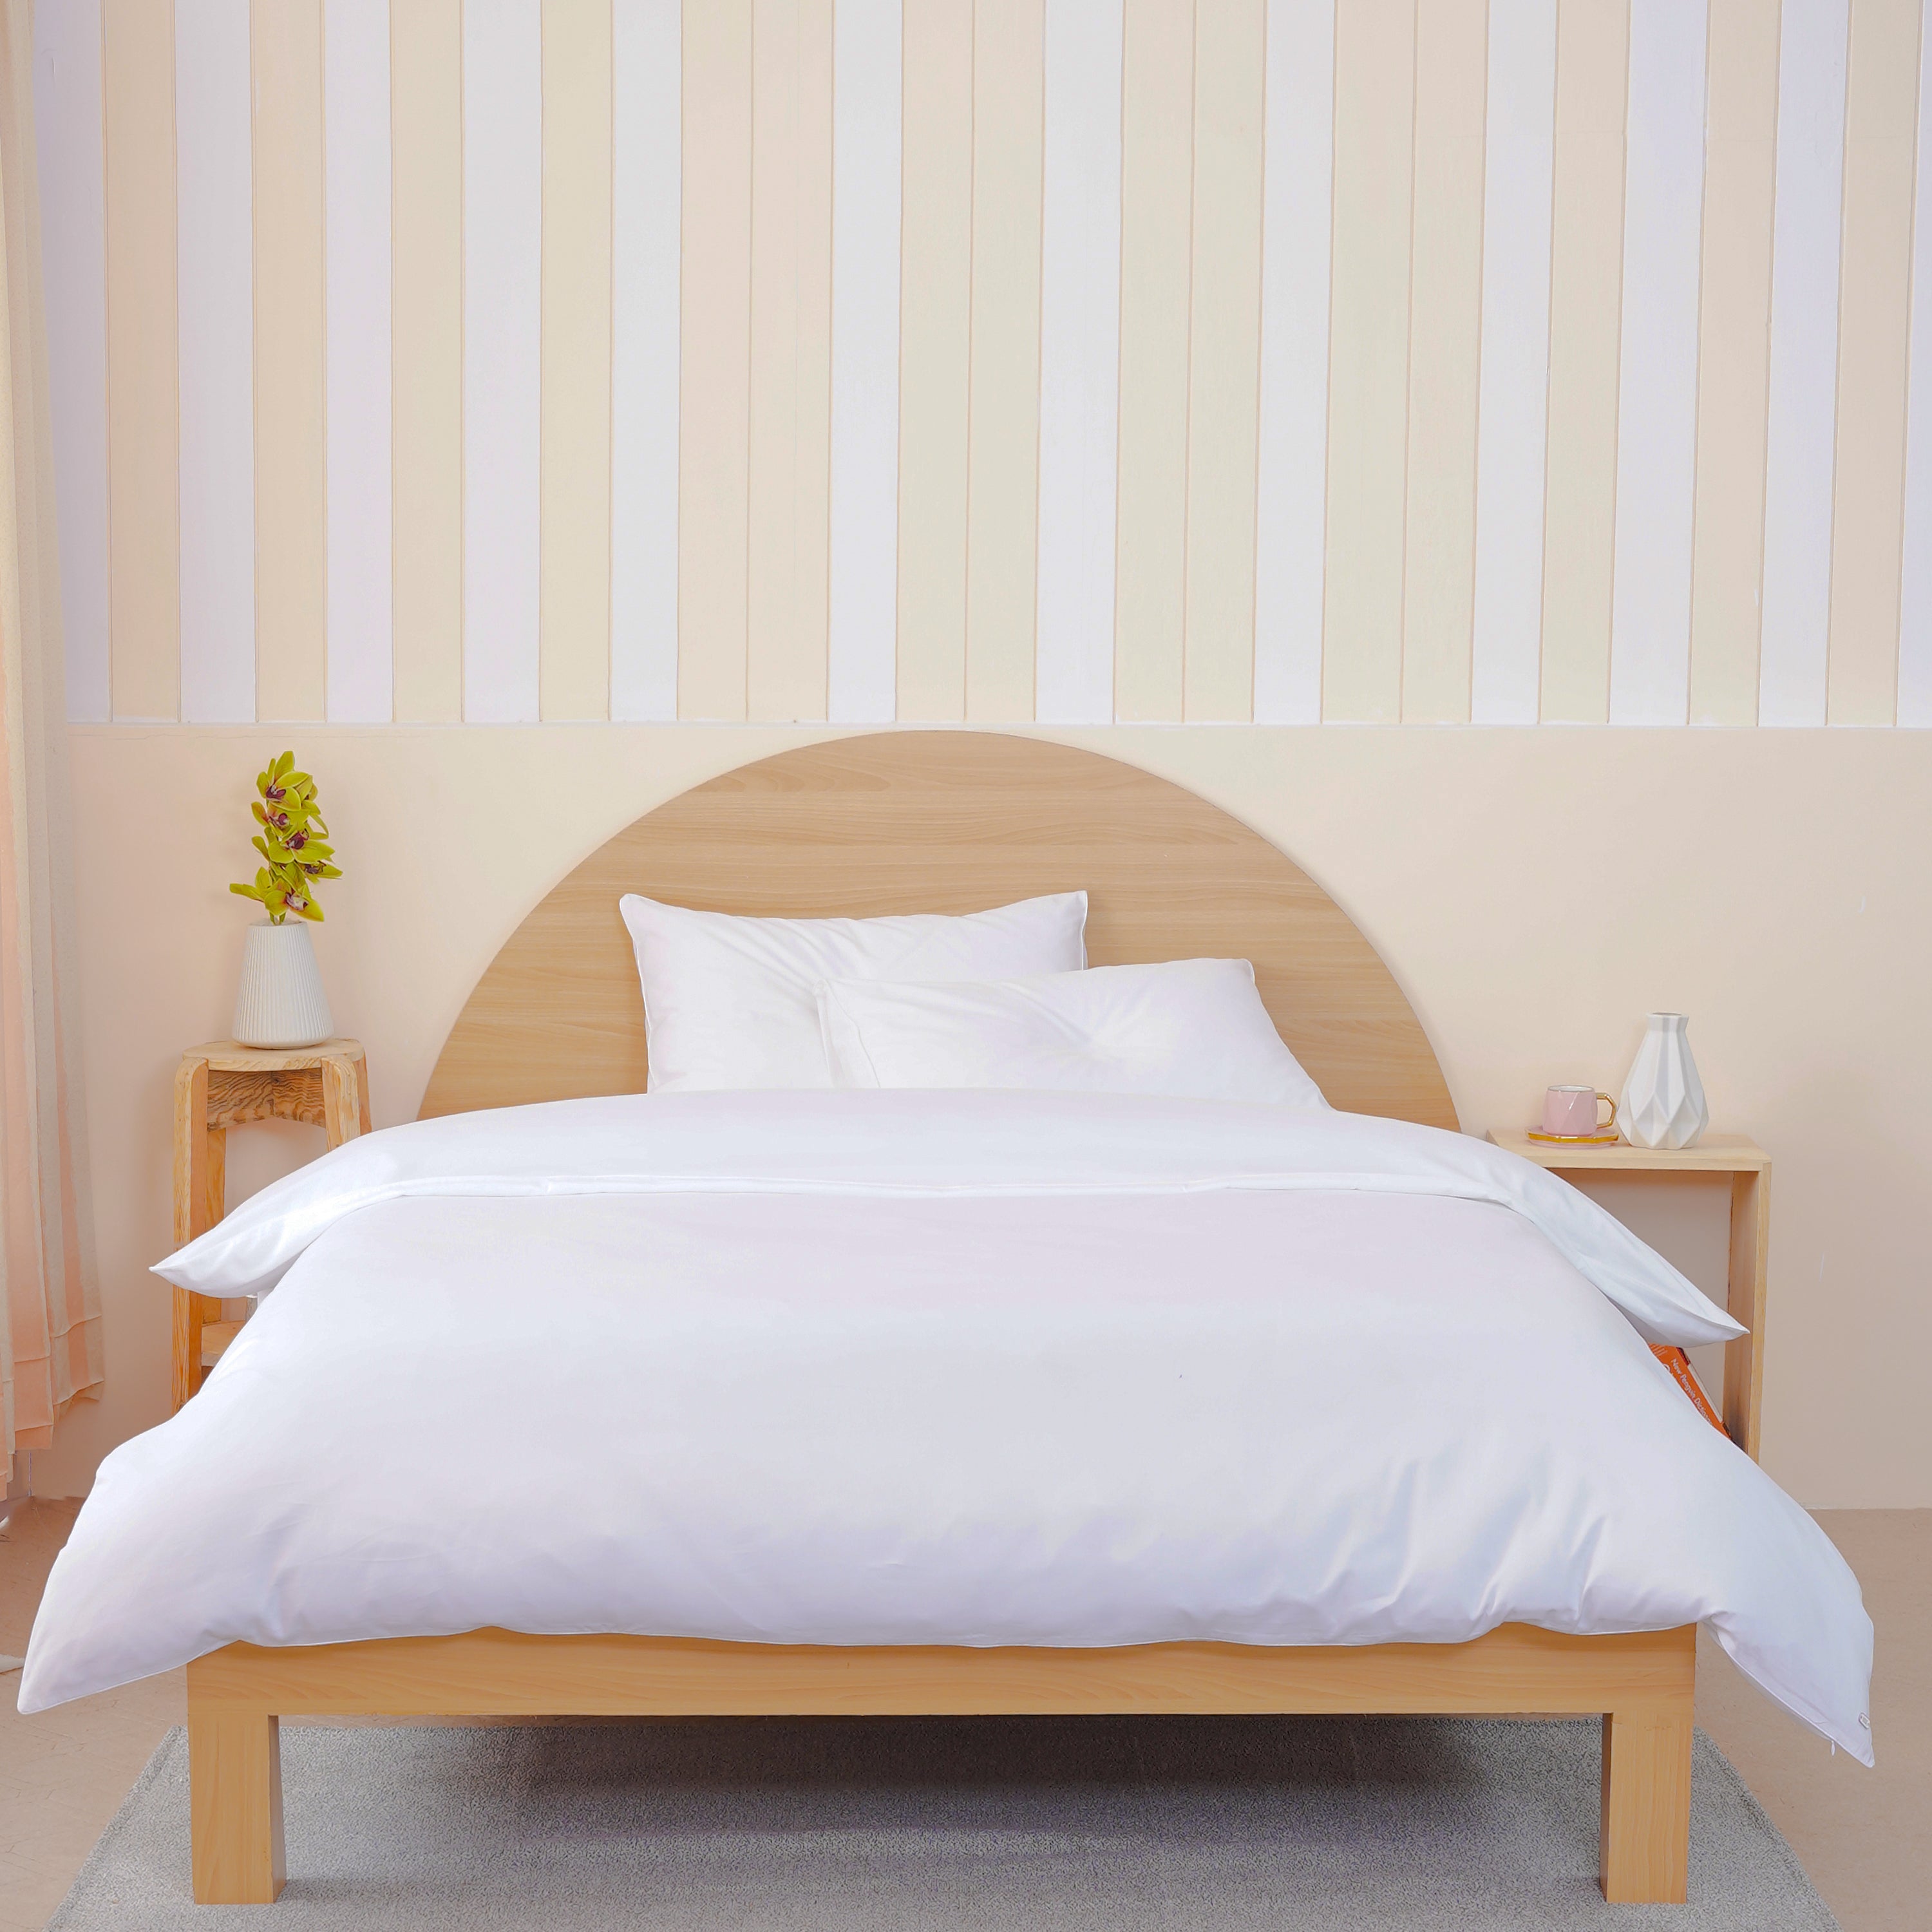 Ackly Bamboo - White Duvet Cover